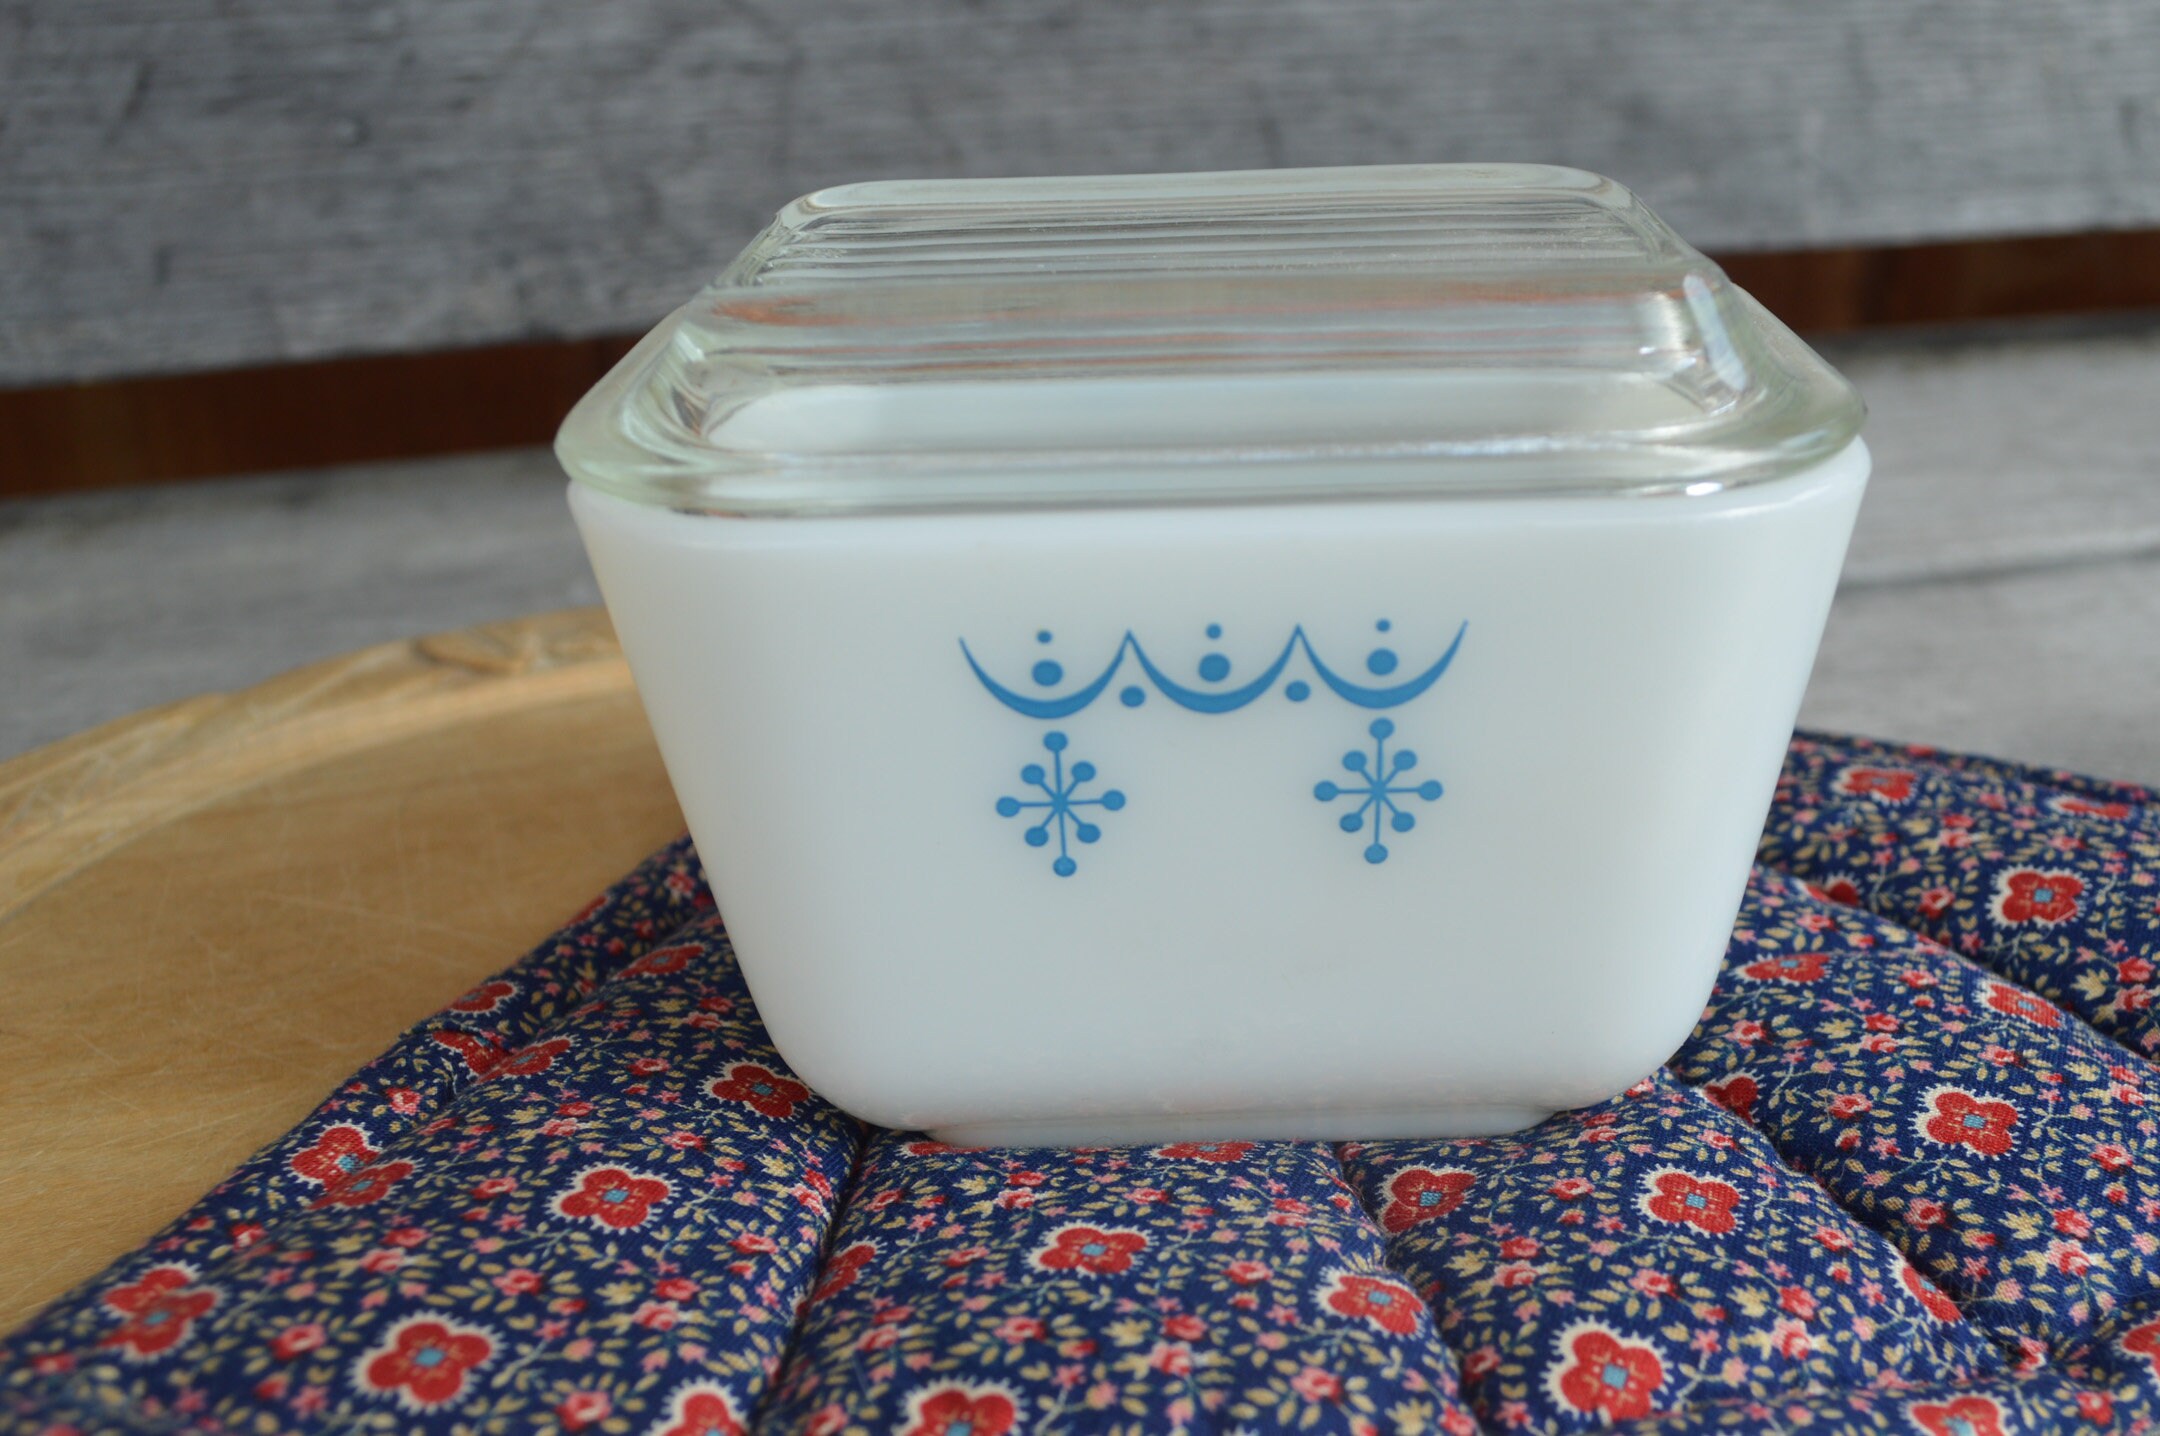 My First Pyrex - Square Baby Food Storage Blue - Pyrex® Webshop AR